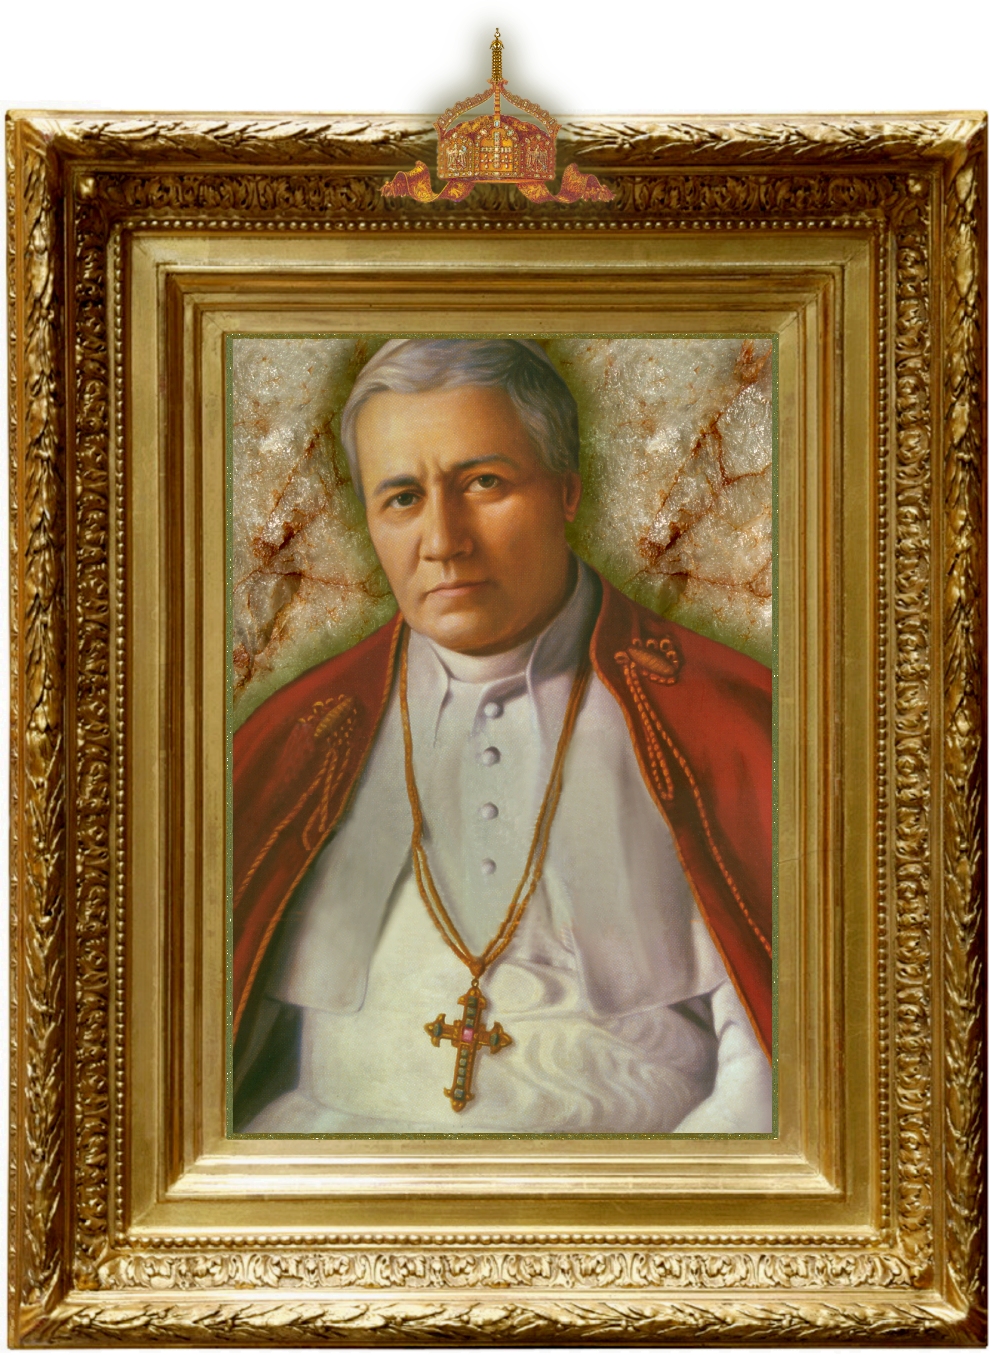 POPE ST. PIUS X IN GOLD FRAME